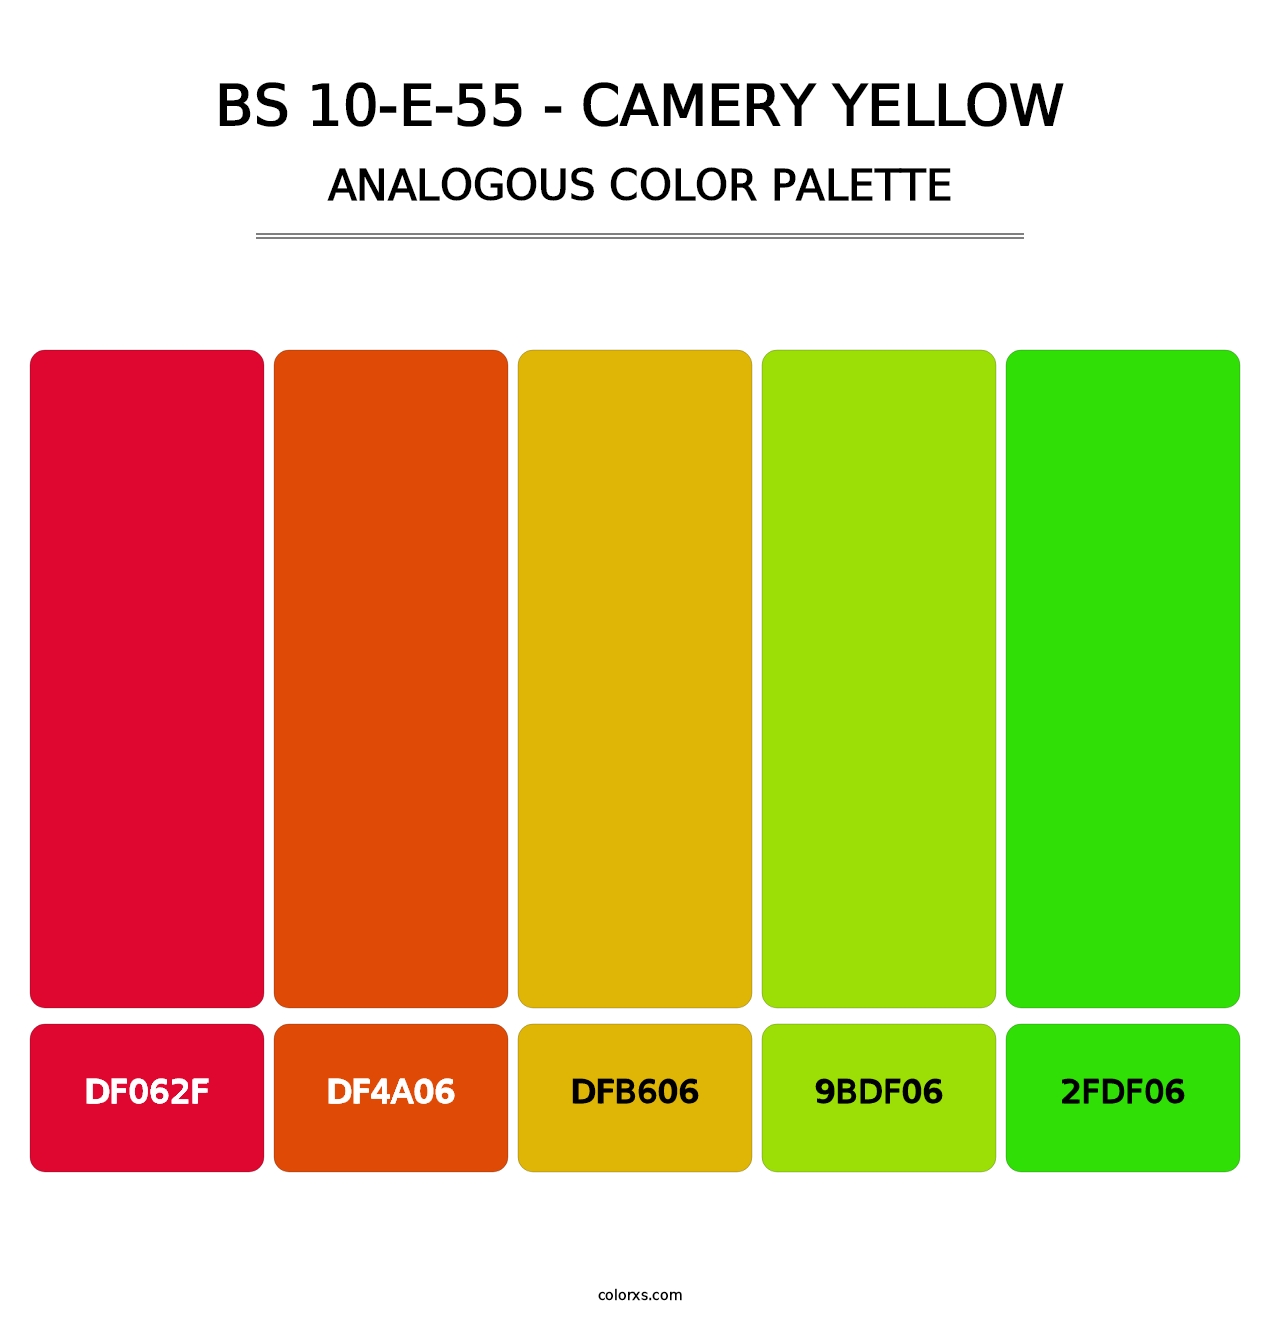 BS 10-E-55 - Camery Yellow - Analogous Color Palette